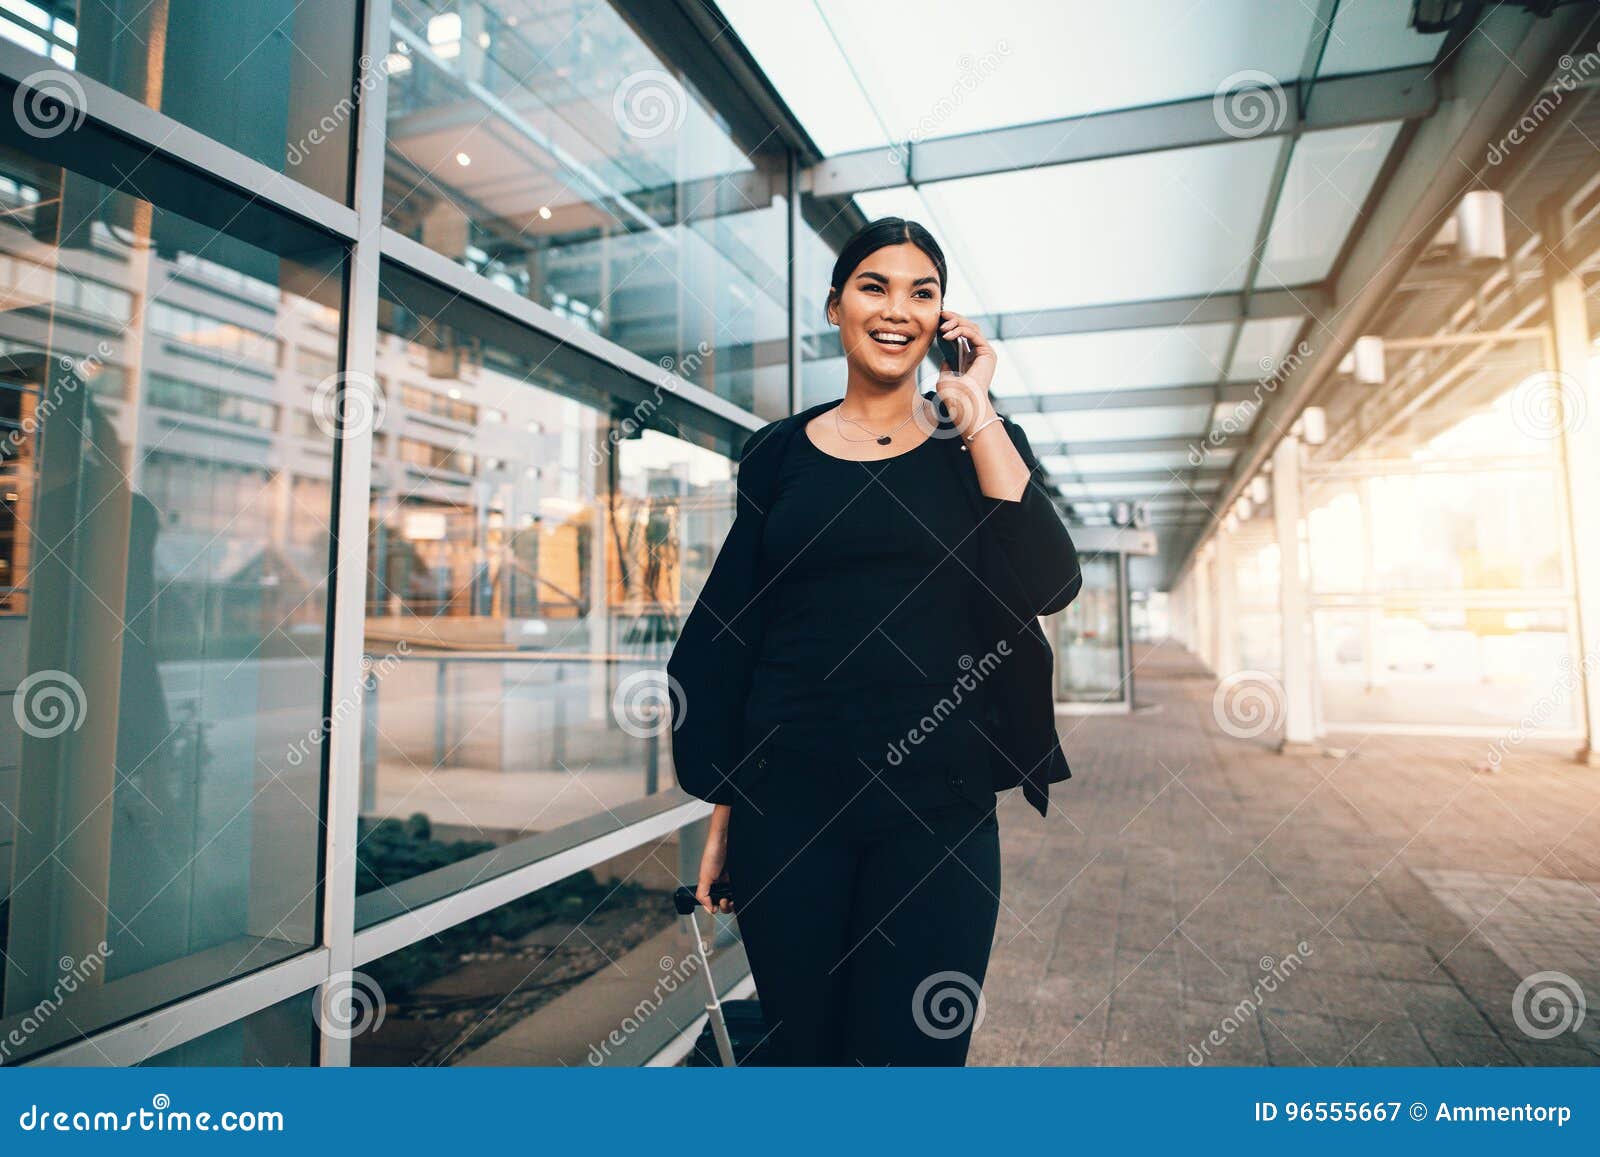 Travelling Businesswoman Making Phone Call Stock Image - Image of ...